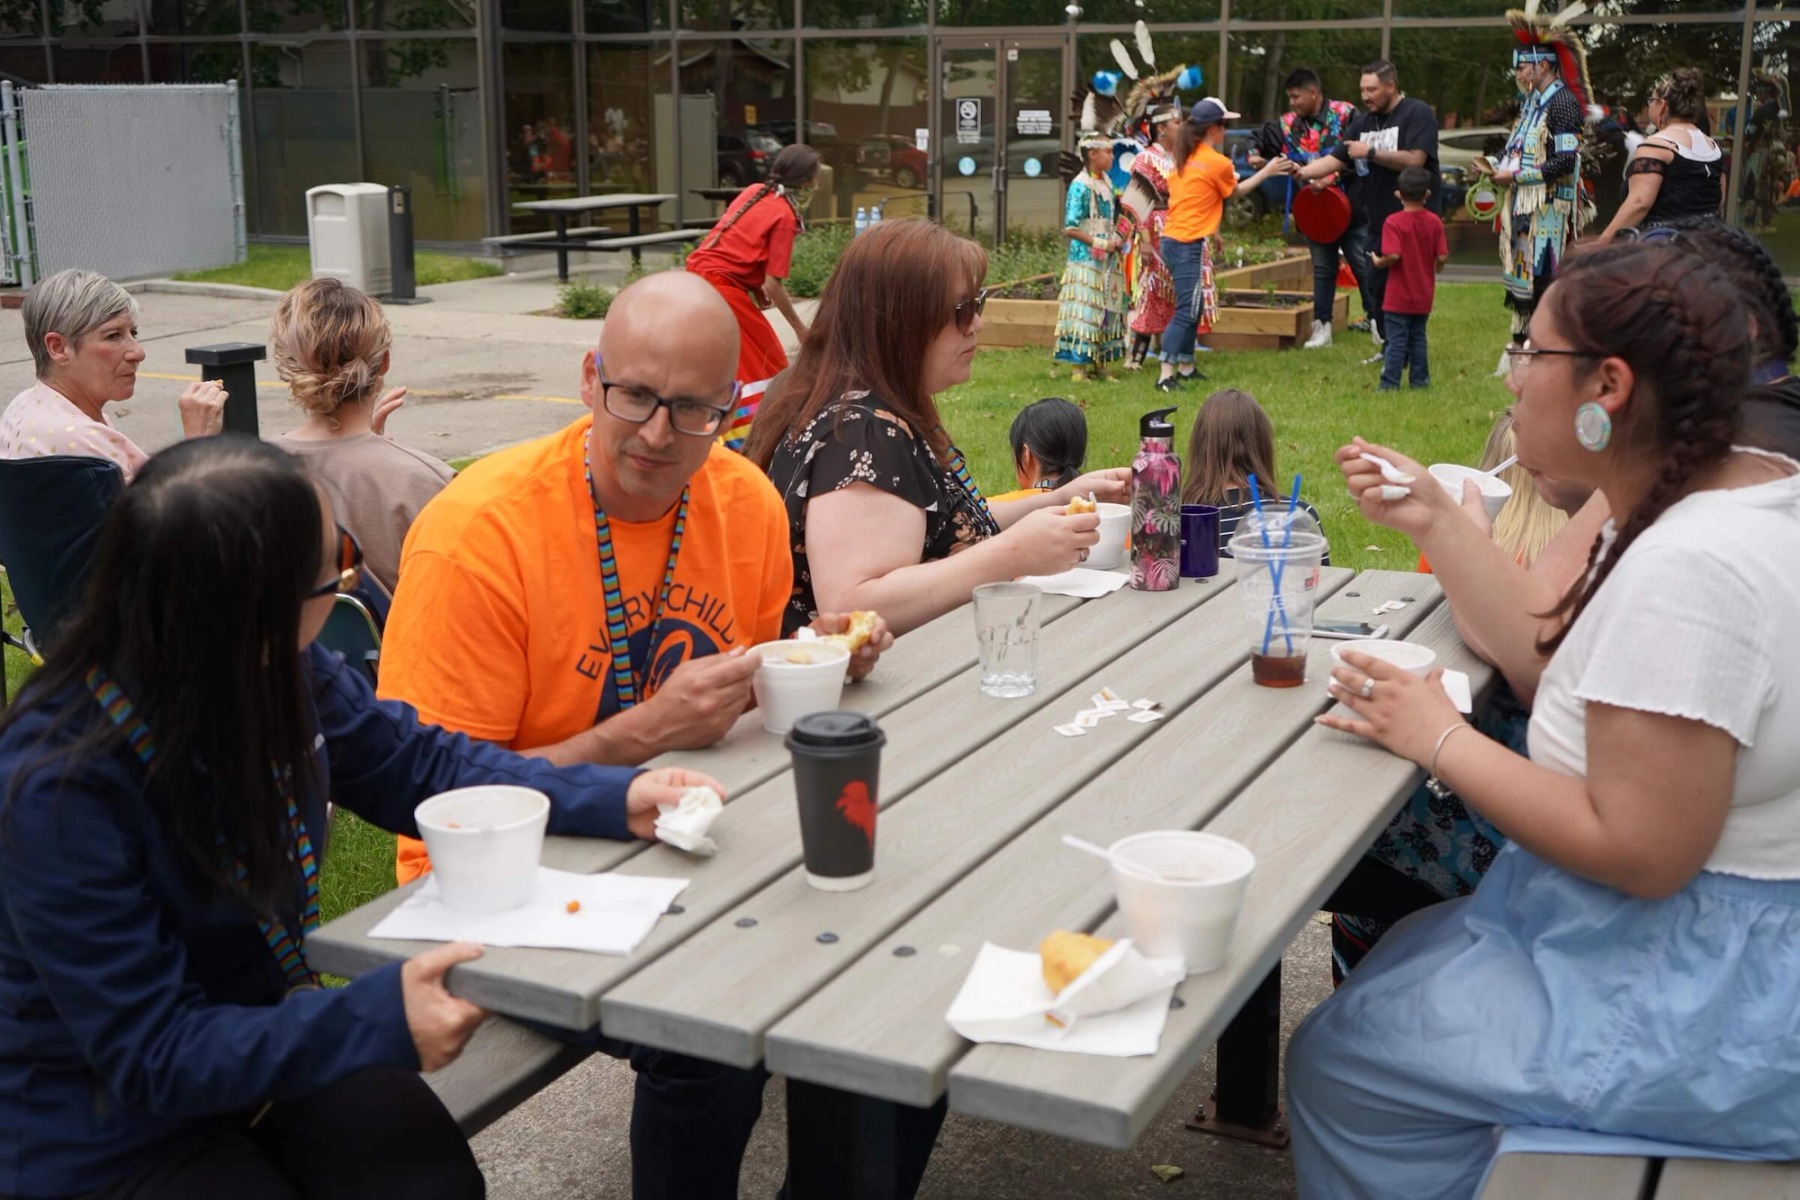 A group of people chat at a grey picnic table while eating food and drinking coffee.